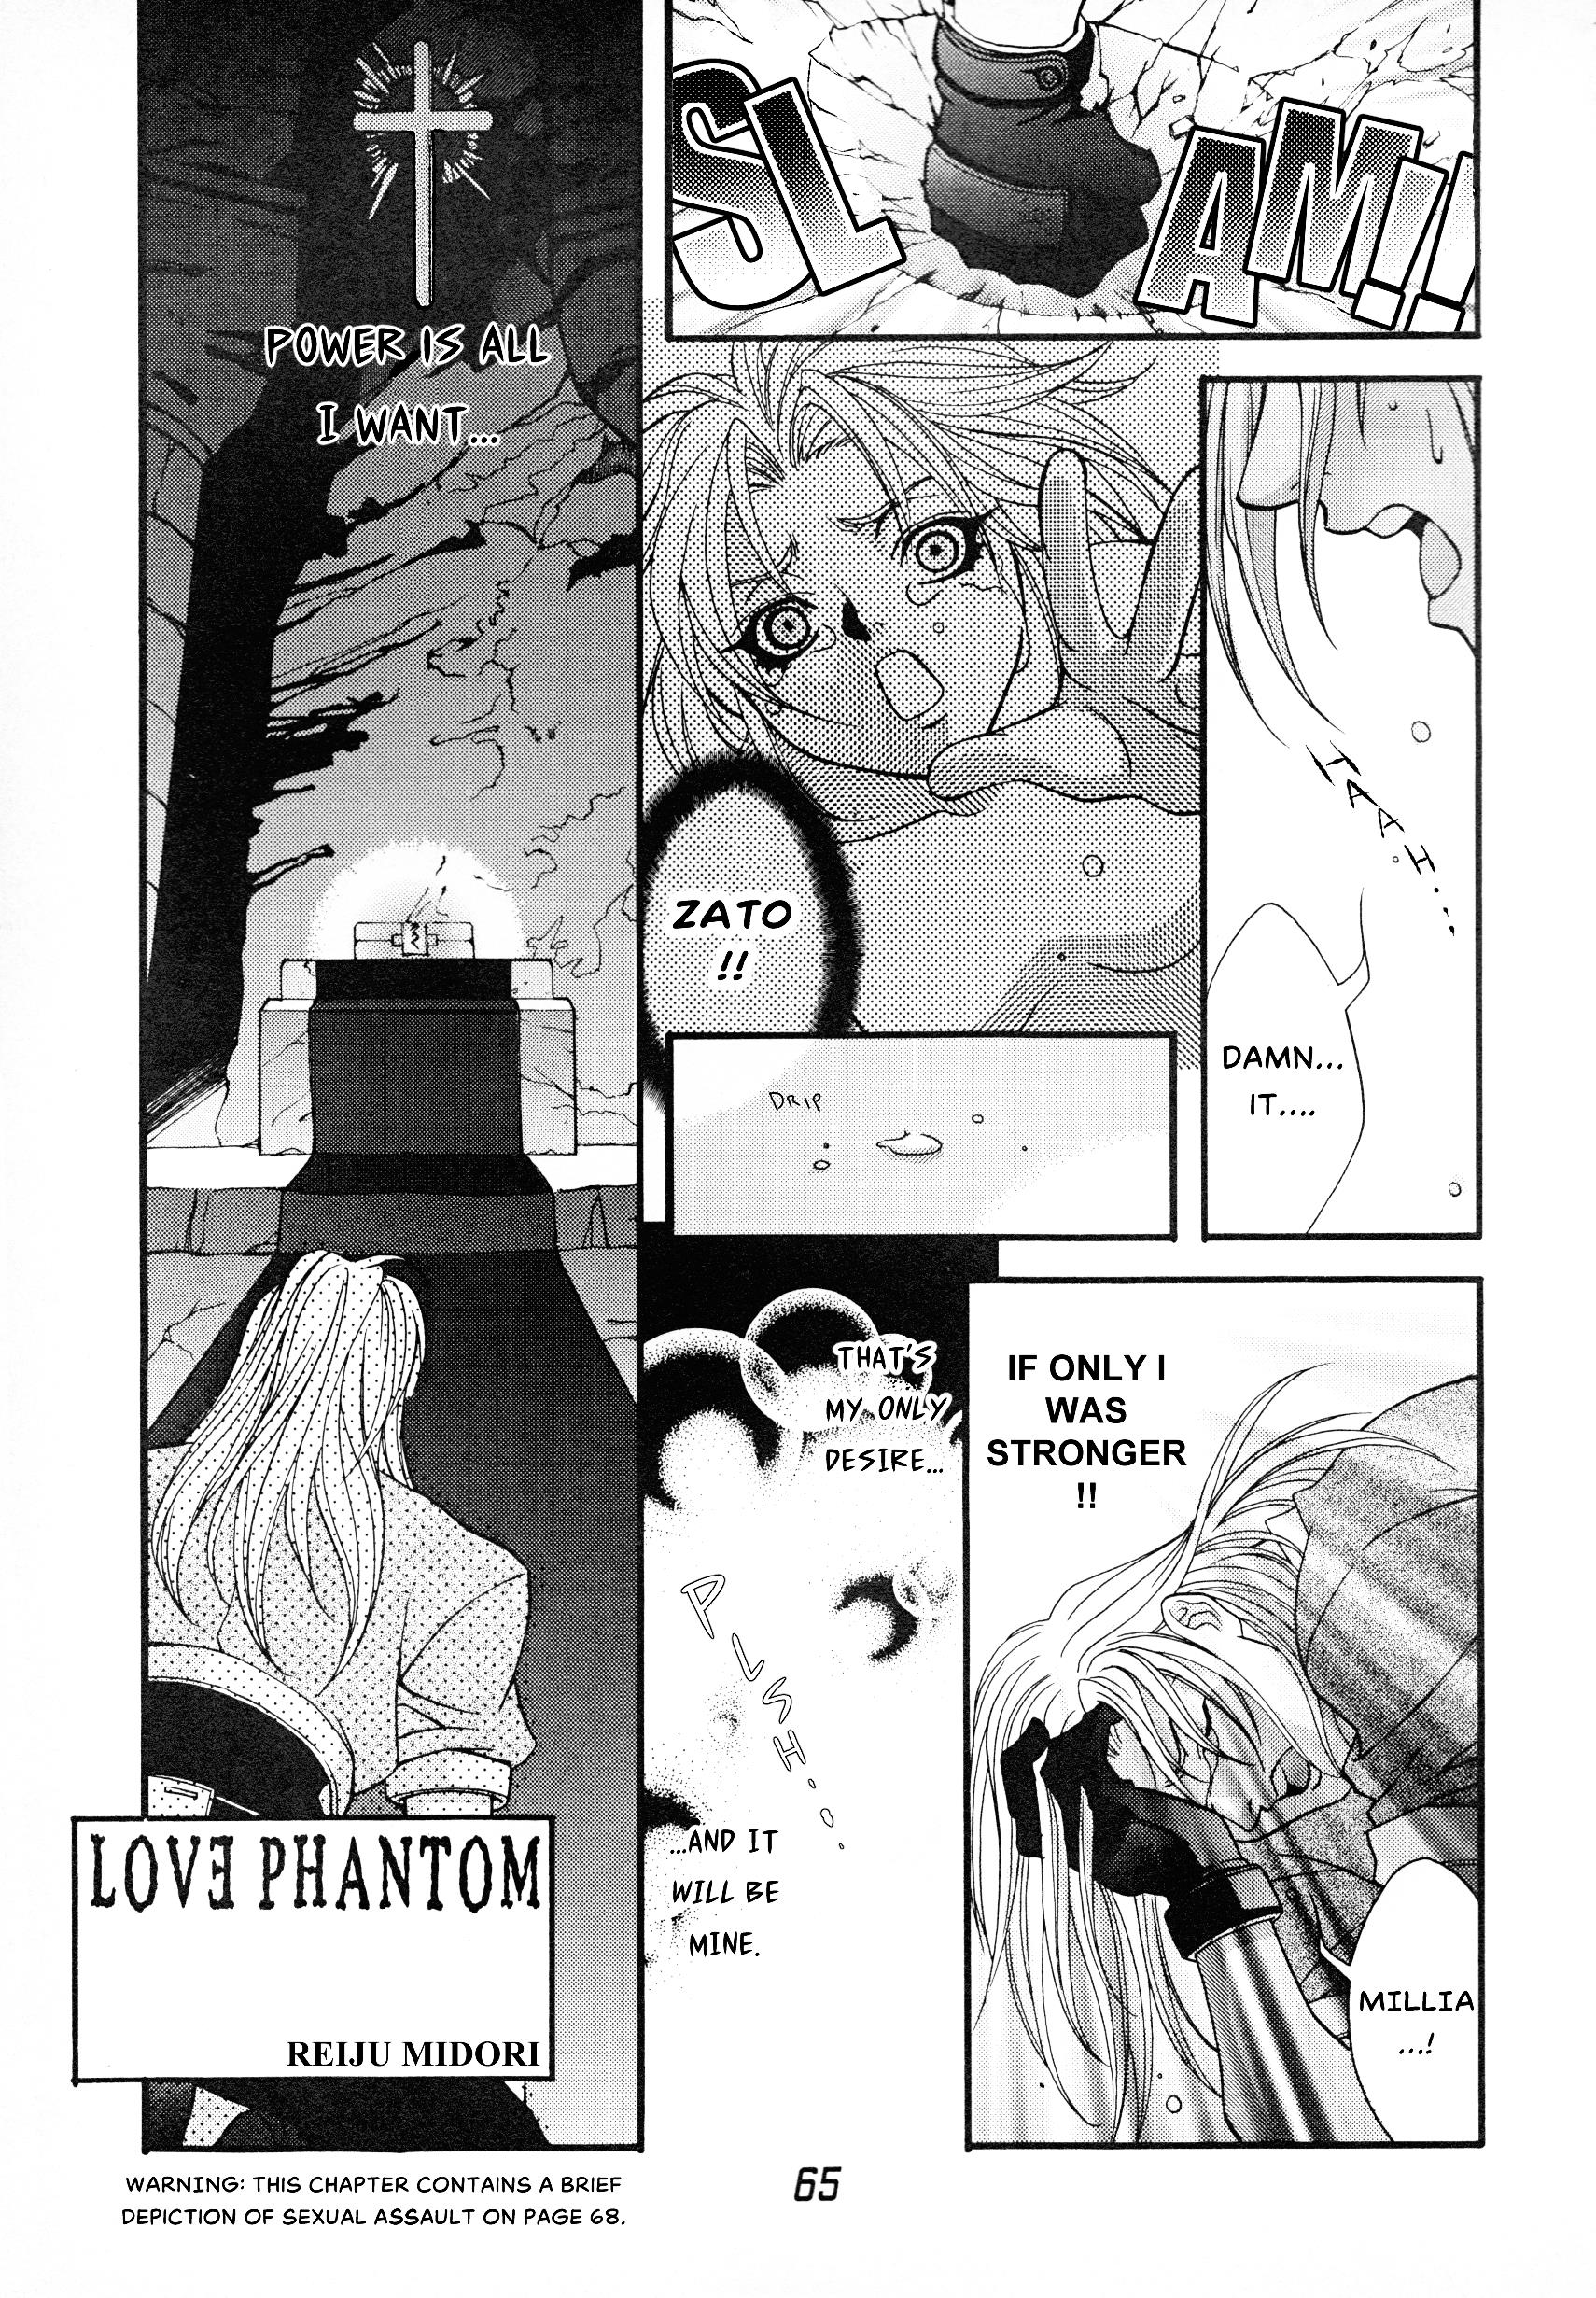 Guilty Gear Comic Anthology Vol.1 Chapter 9: Love Phantom - Picture 1